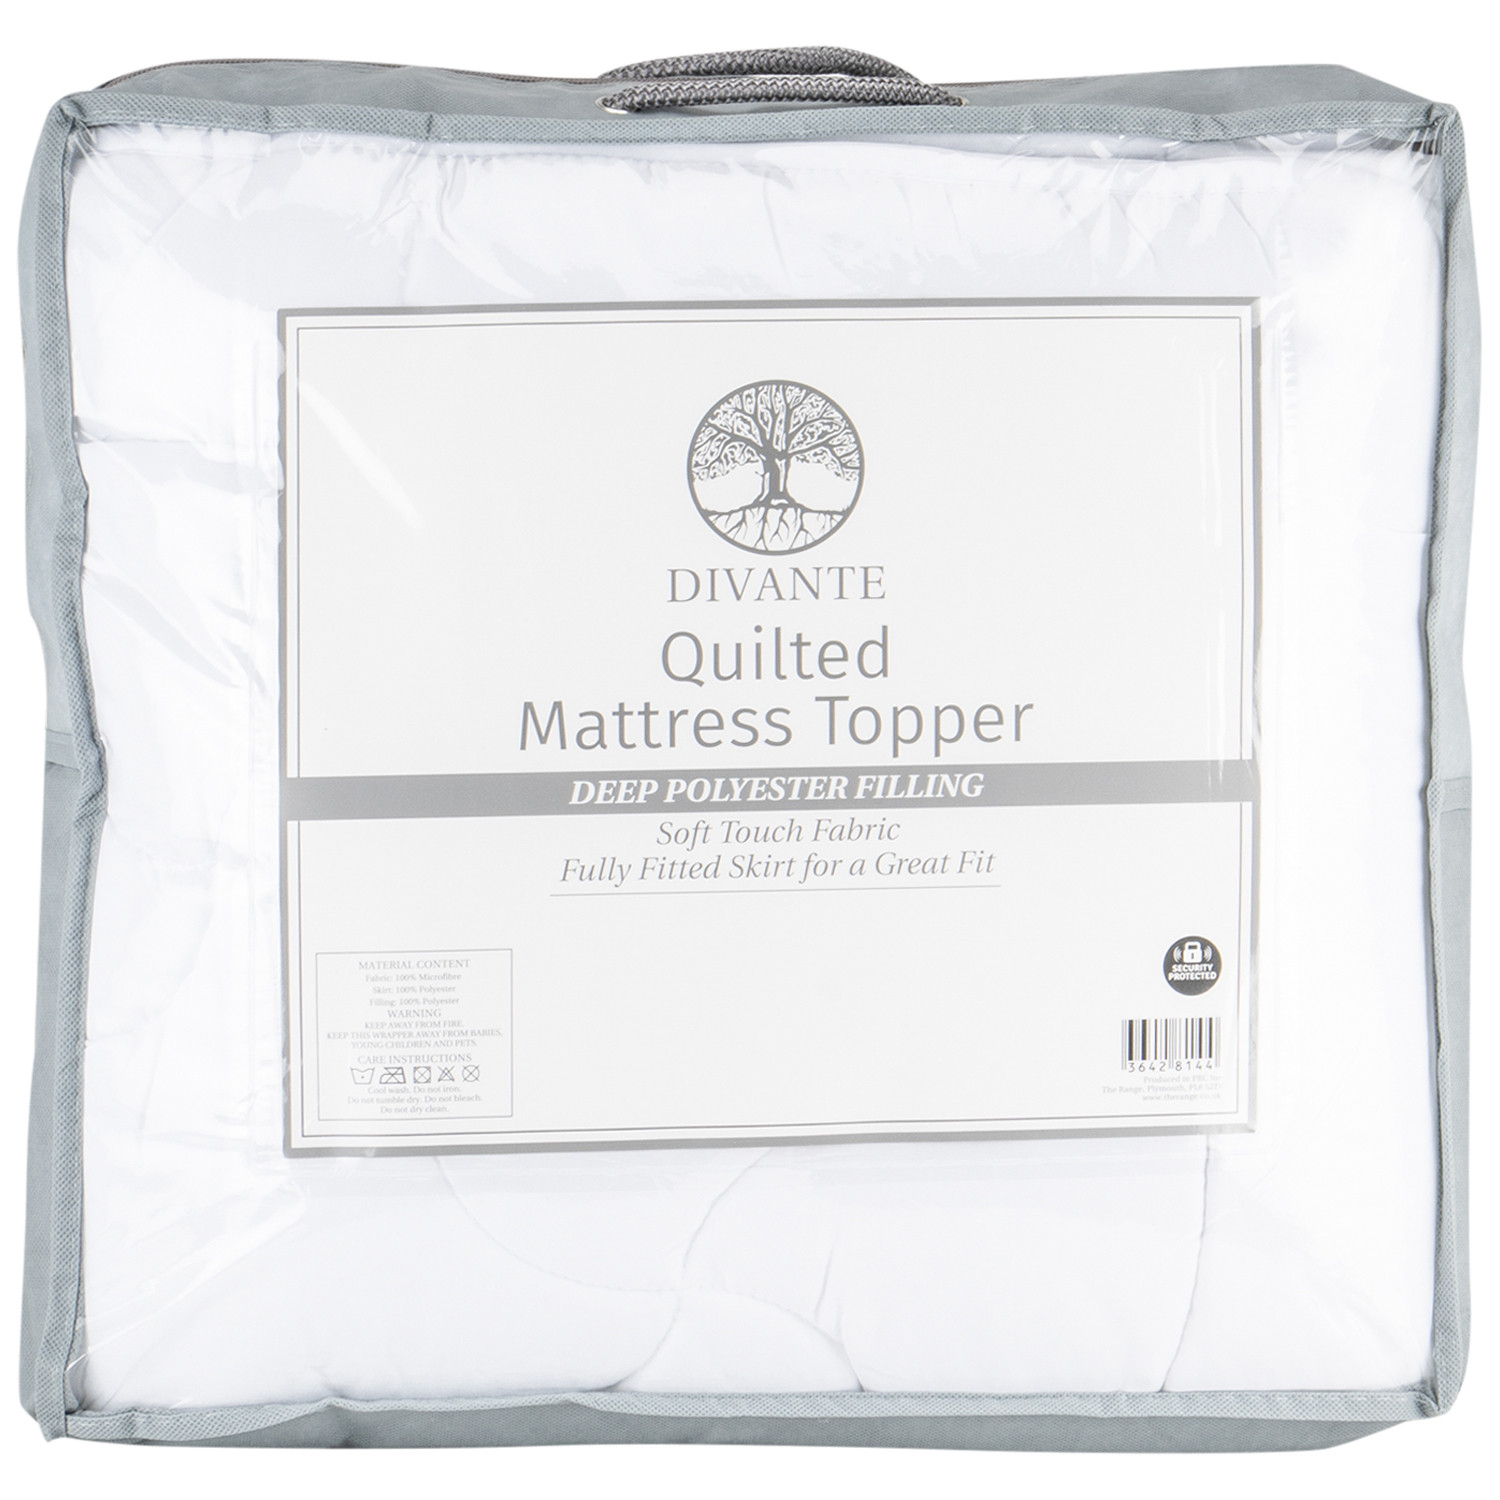 Divante Double Quilted Mattress Topper Image